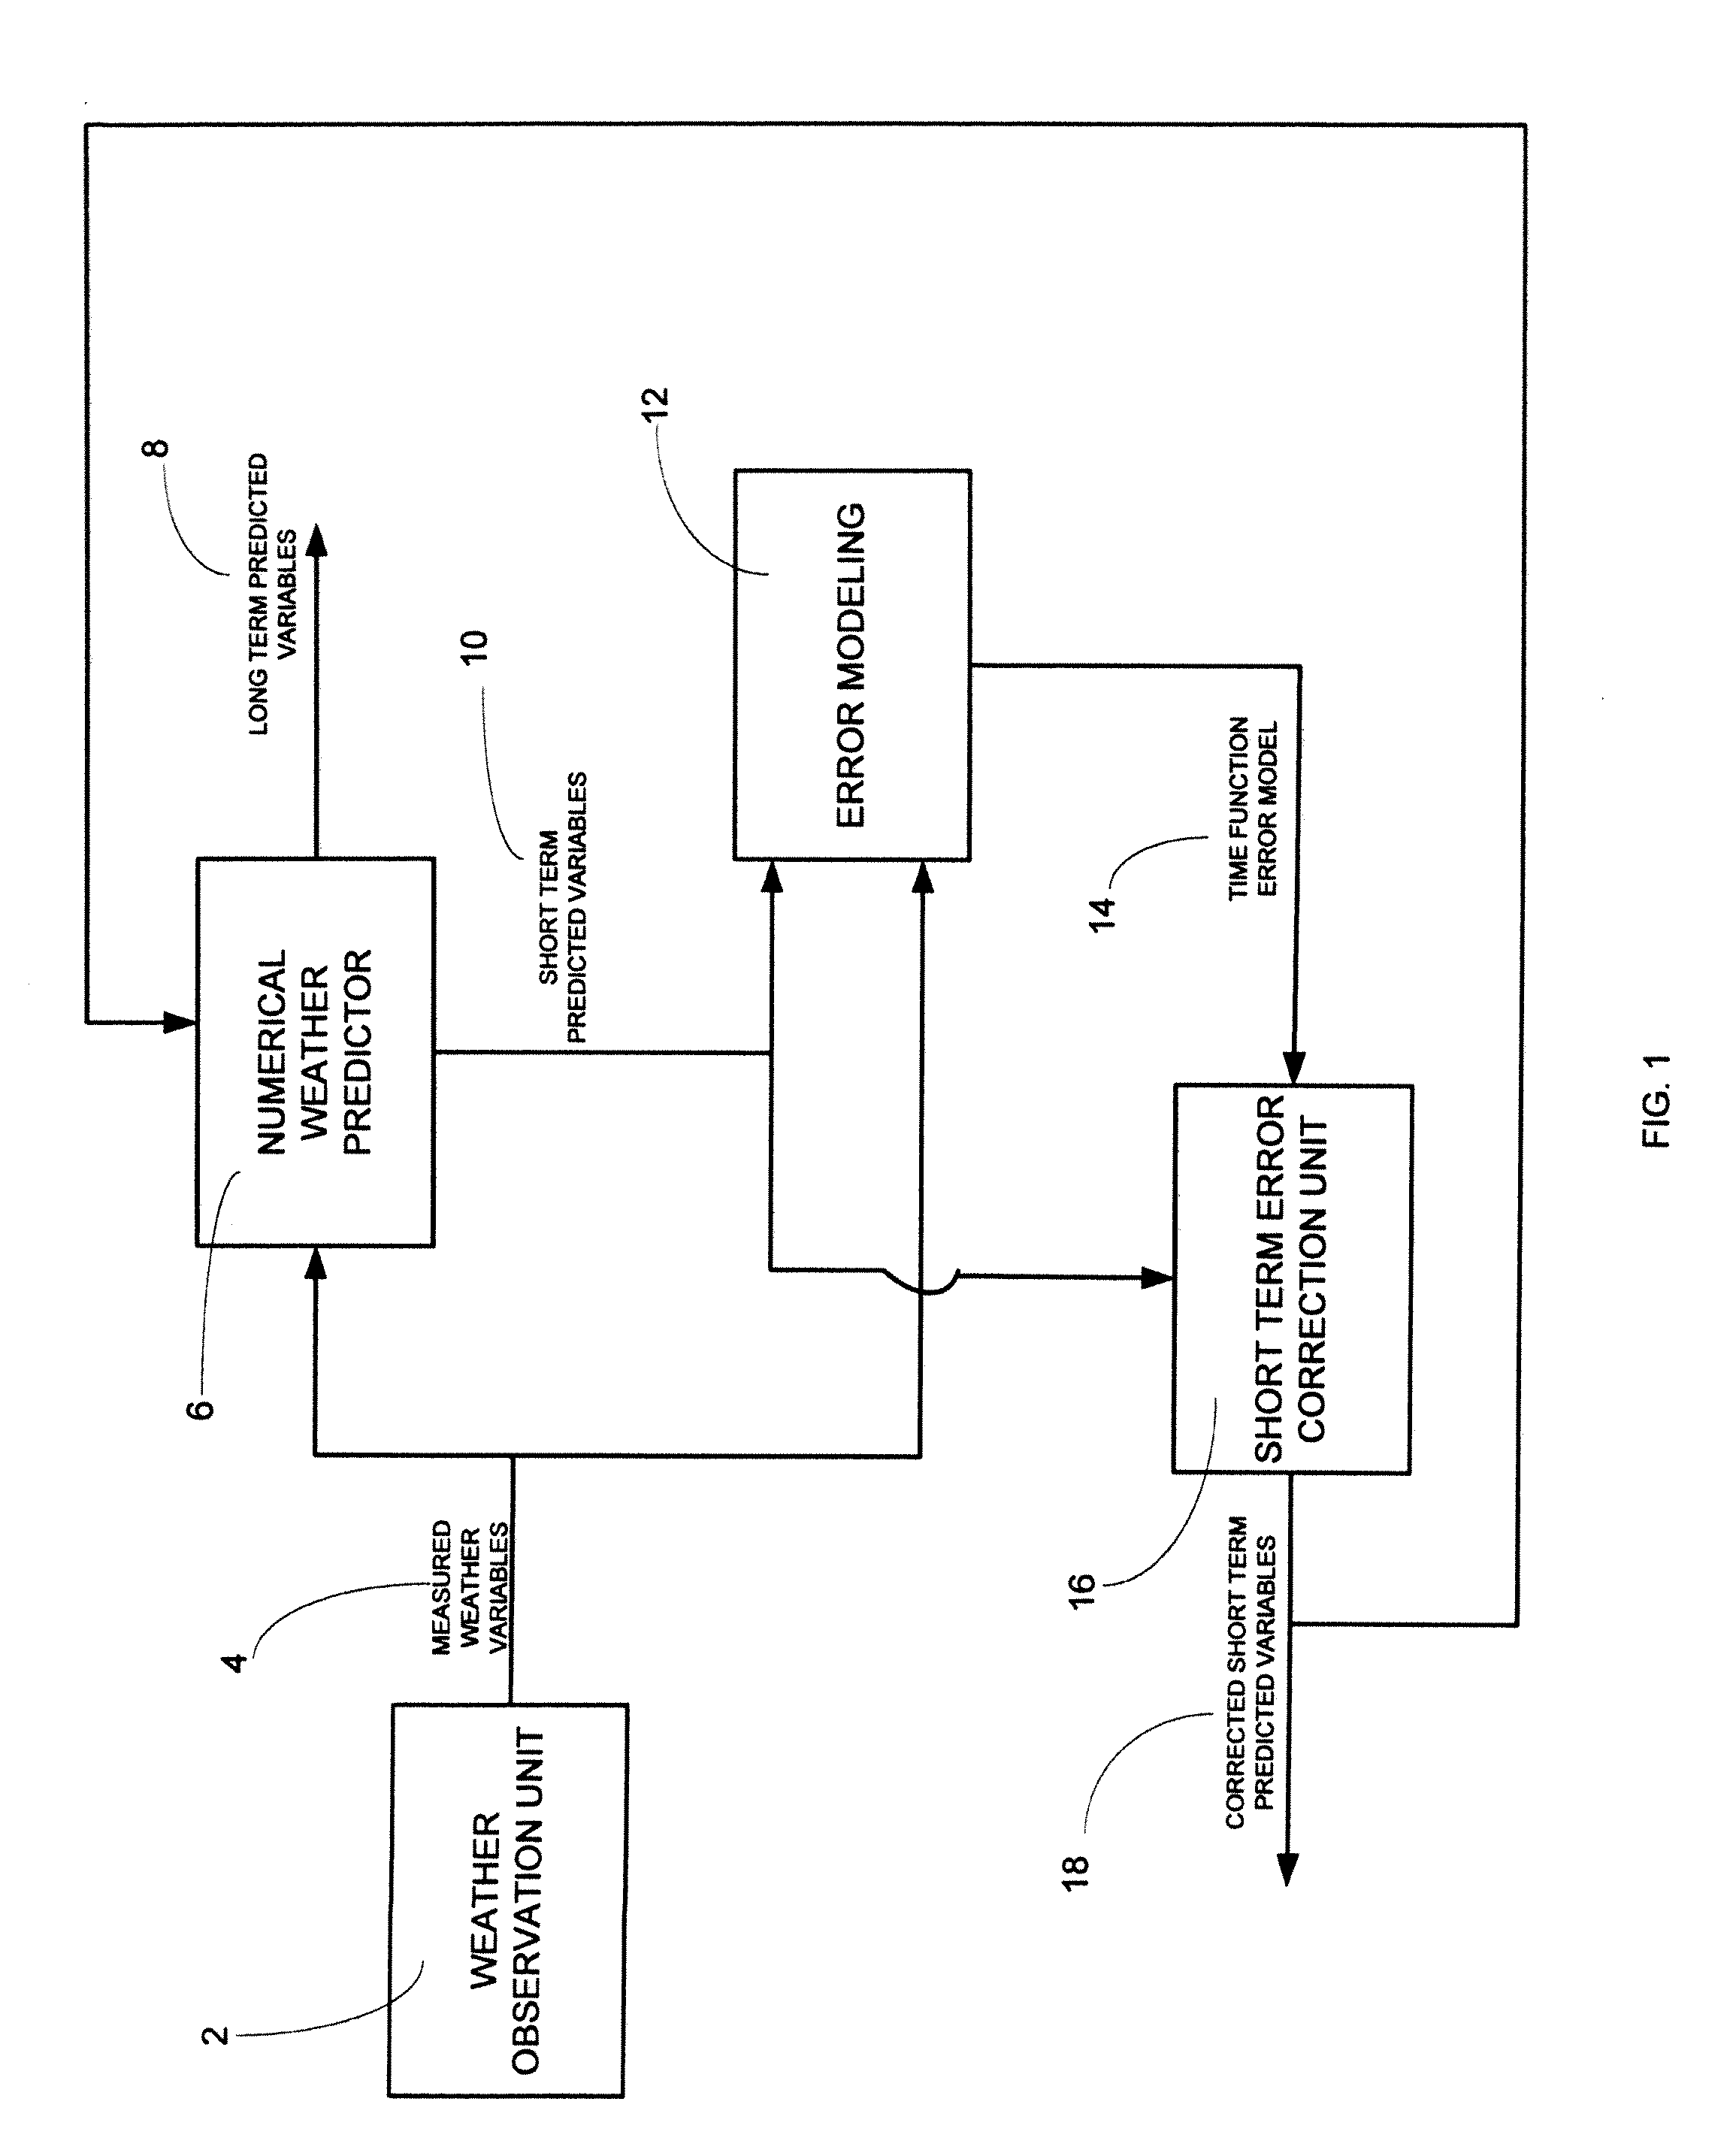 Short term and long term forecasting systems with enhanced prediction accuracy